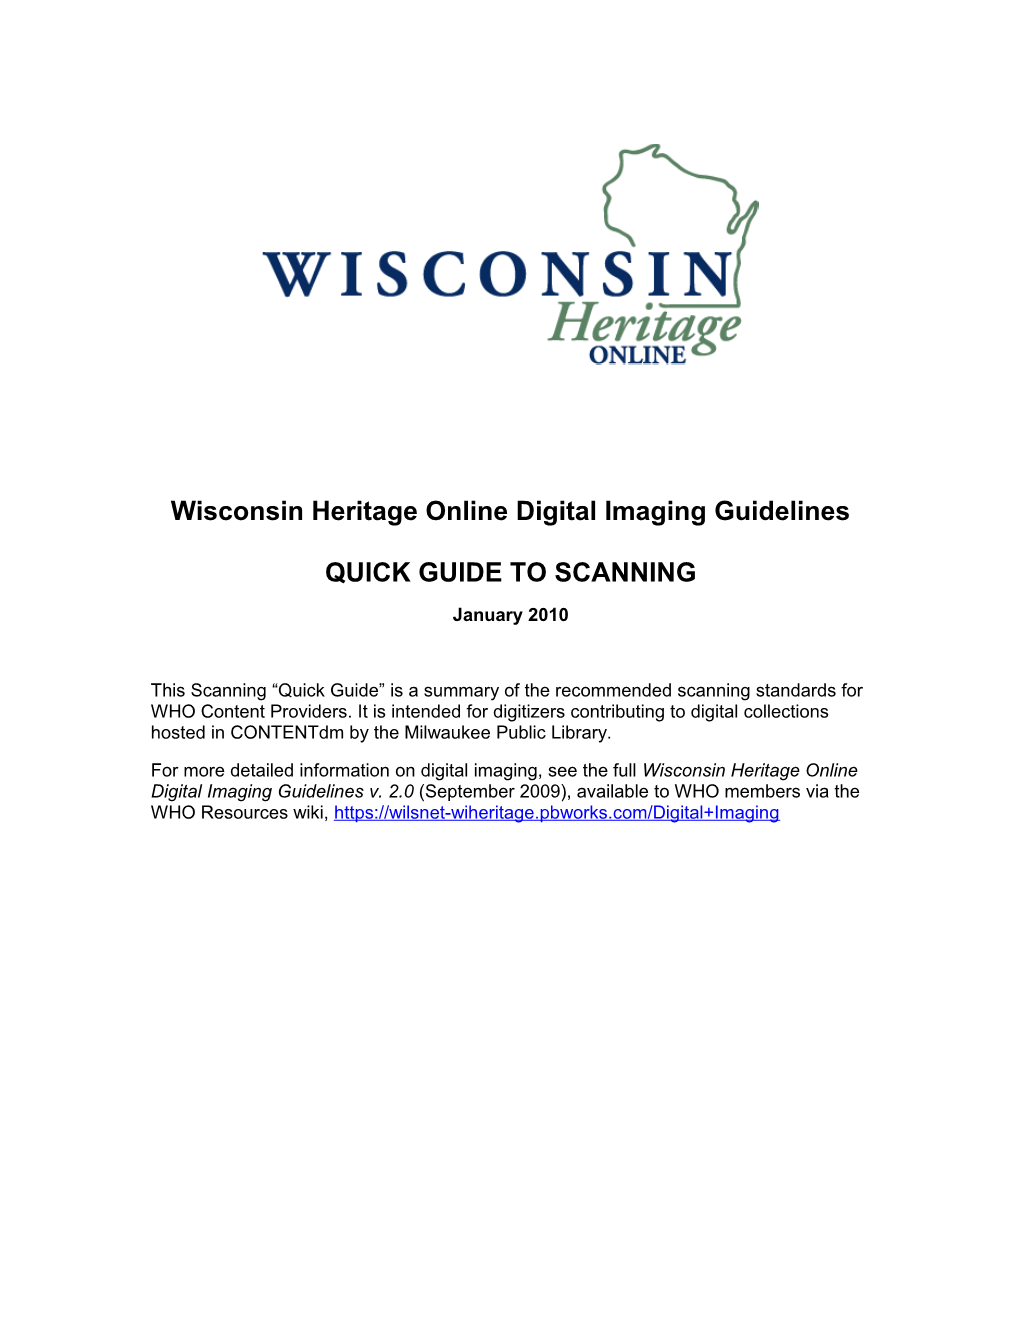 Wisconsin Heritage Online Digital Imaging Guidelines QUICK GUIDE to SCANNING